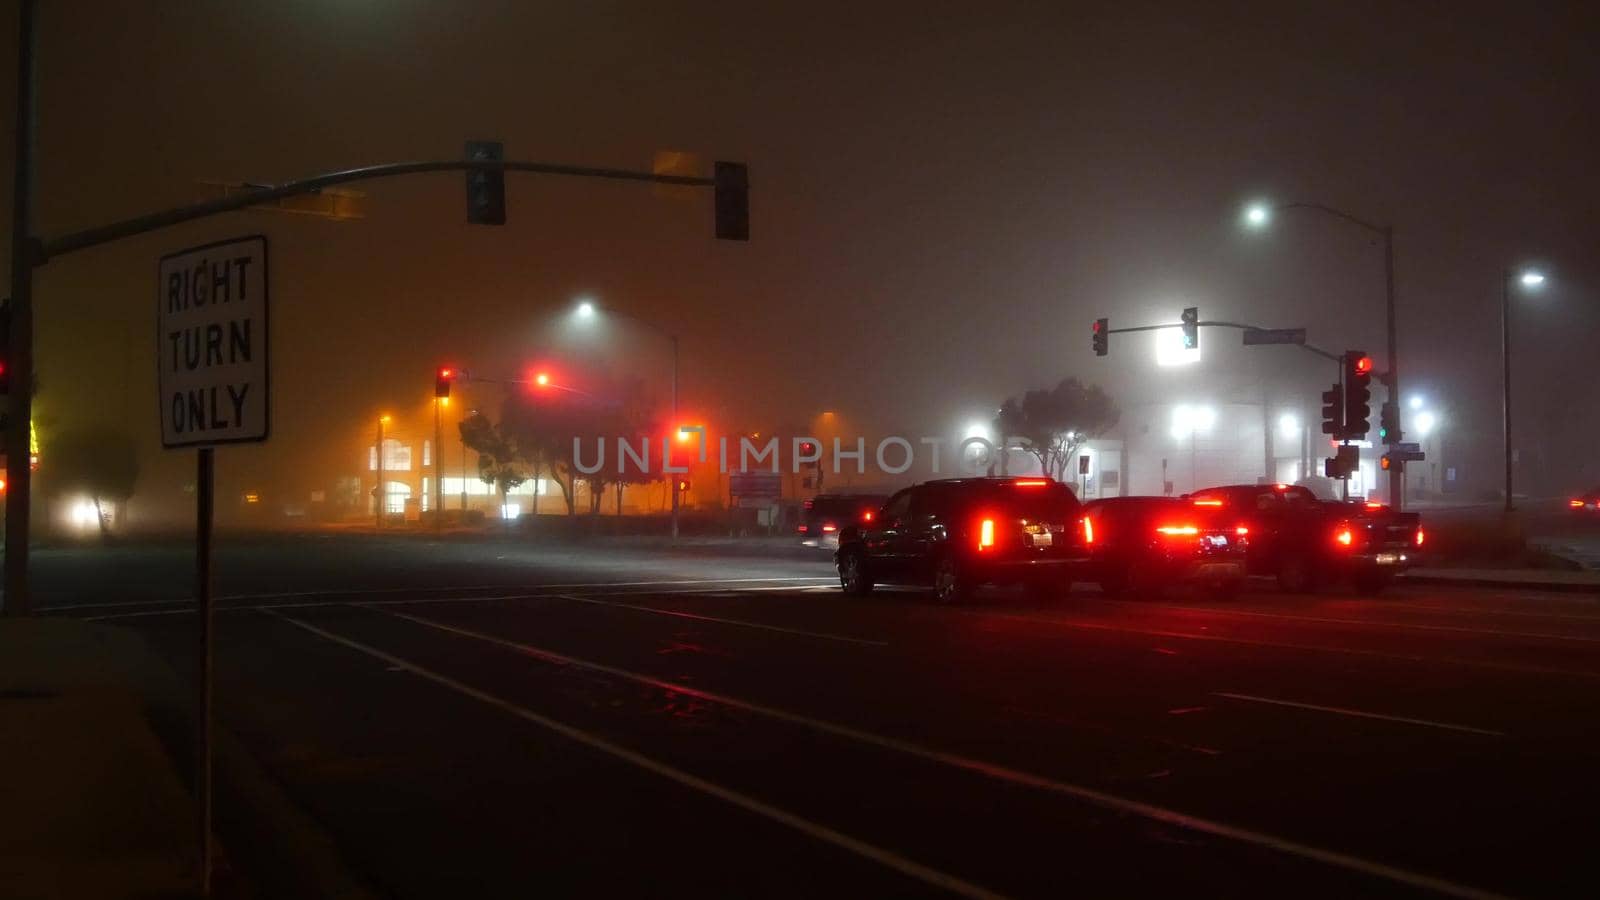 VISTA, CALIFORNIA USA - 24 JAN 2020: Marine layer, dense fog on driveway crossroad at night. June gloom, misty nebulous bad weather. Dangerous low visibility on road intersection. Car traffic safety by DogoraSun